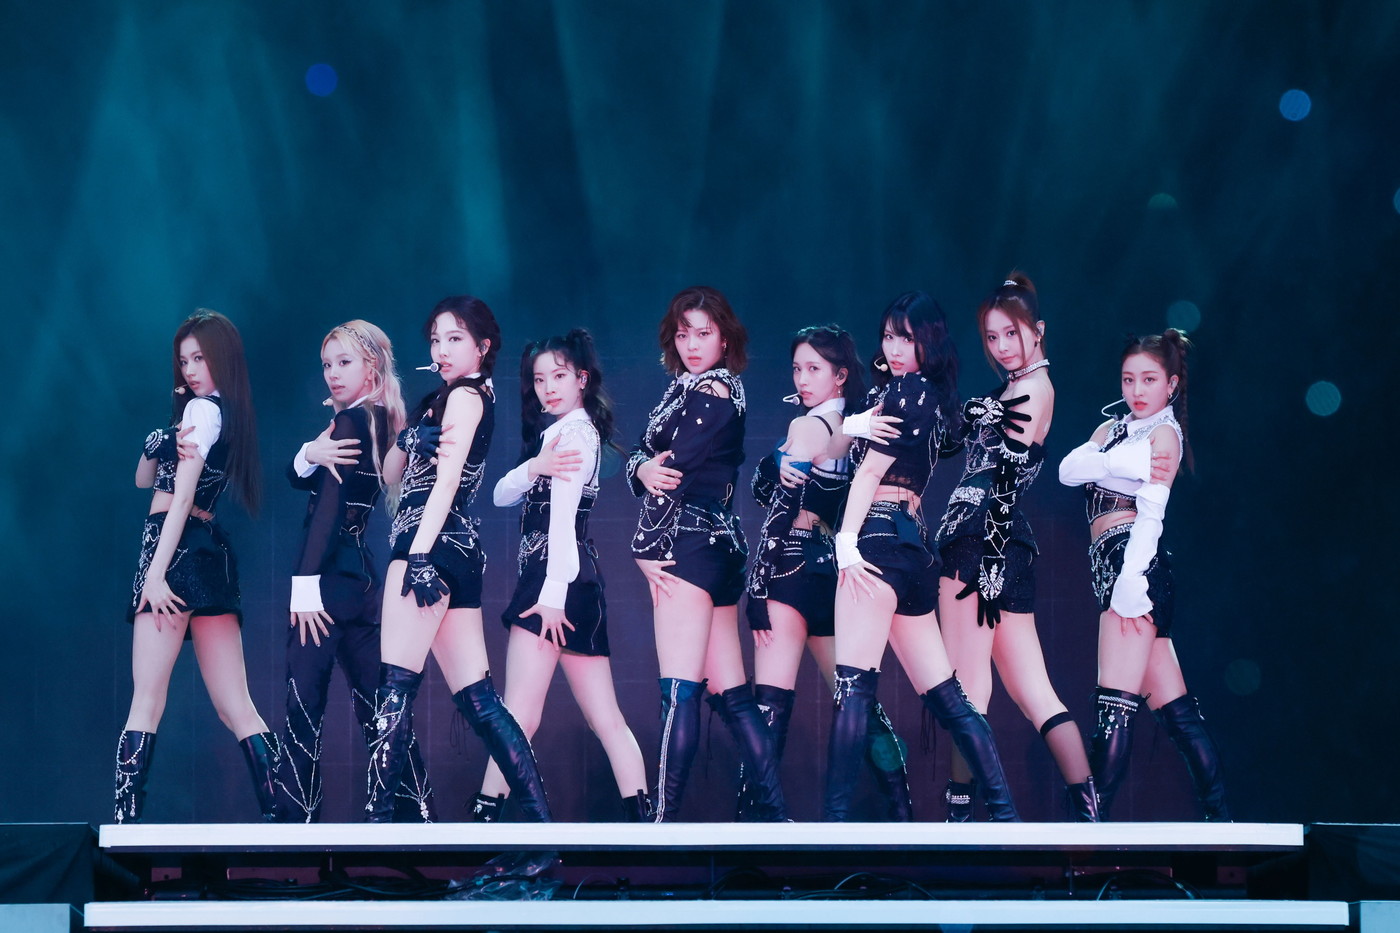 『TWICE 5TH WORLD TOUR ‘READY TO BE’ in JAPAN SPECIAL』味の素スタジアム2daysの追加公演が決定 - 画像一覧（1/2）